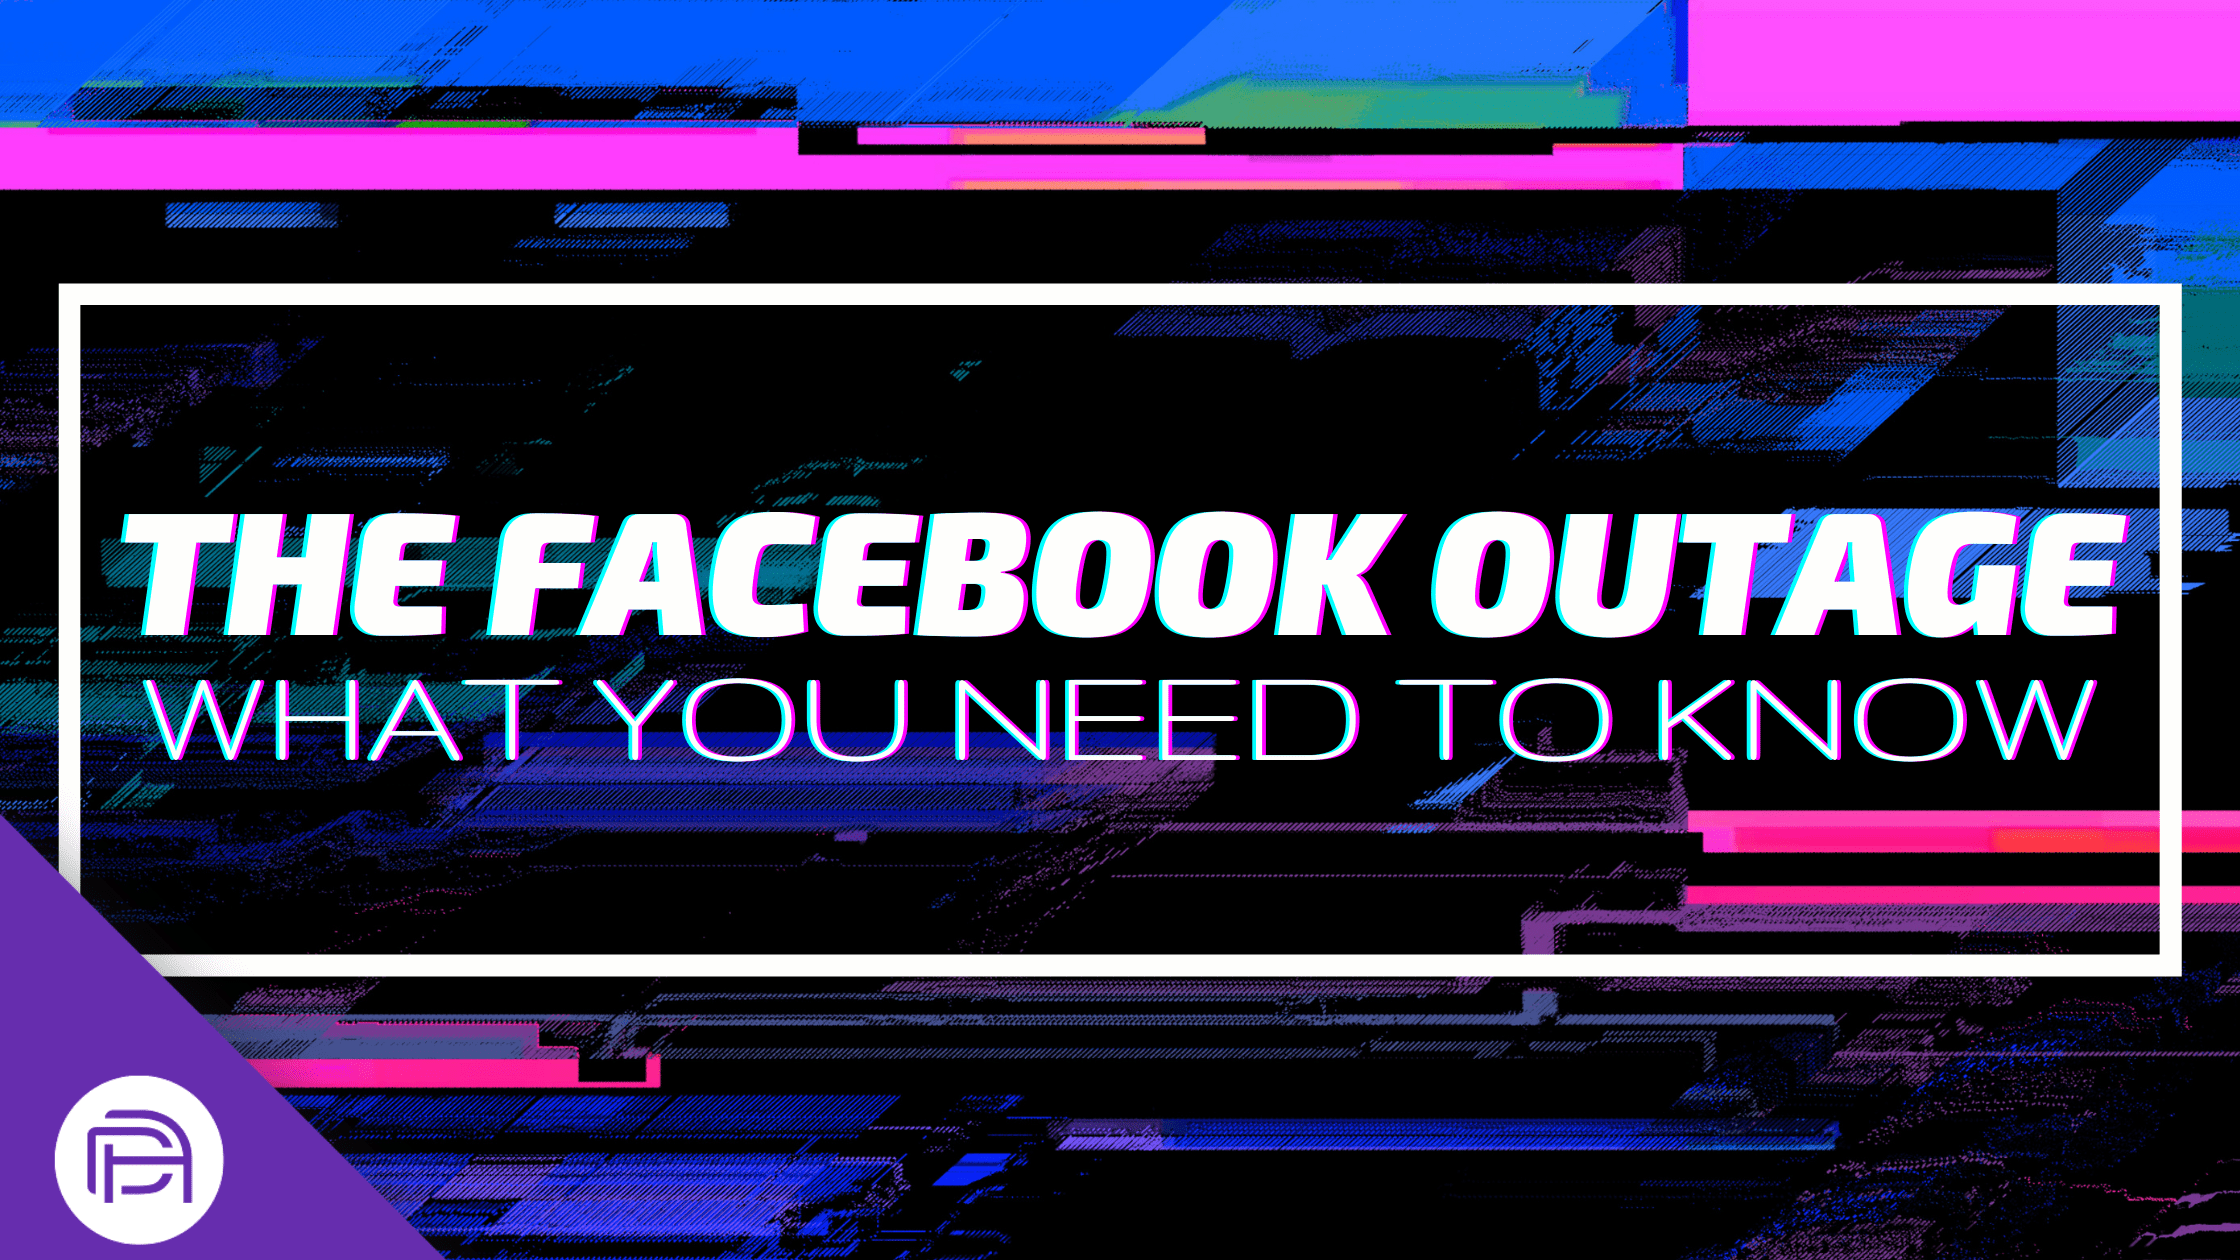 The Facebook Outage: What You Need to Know